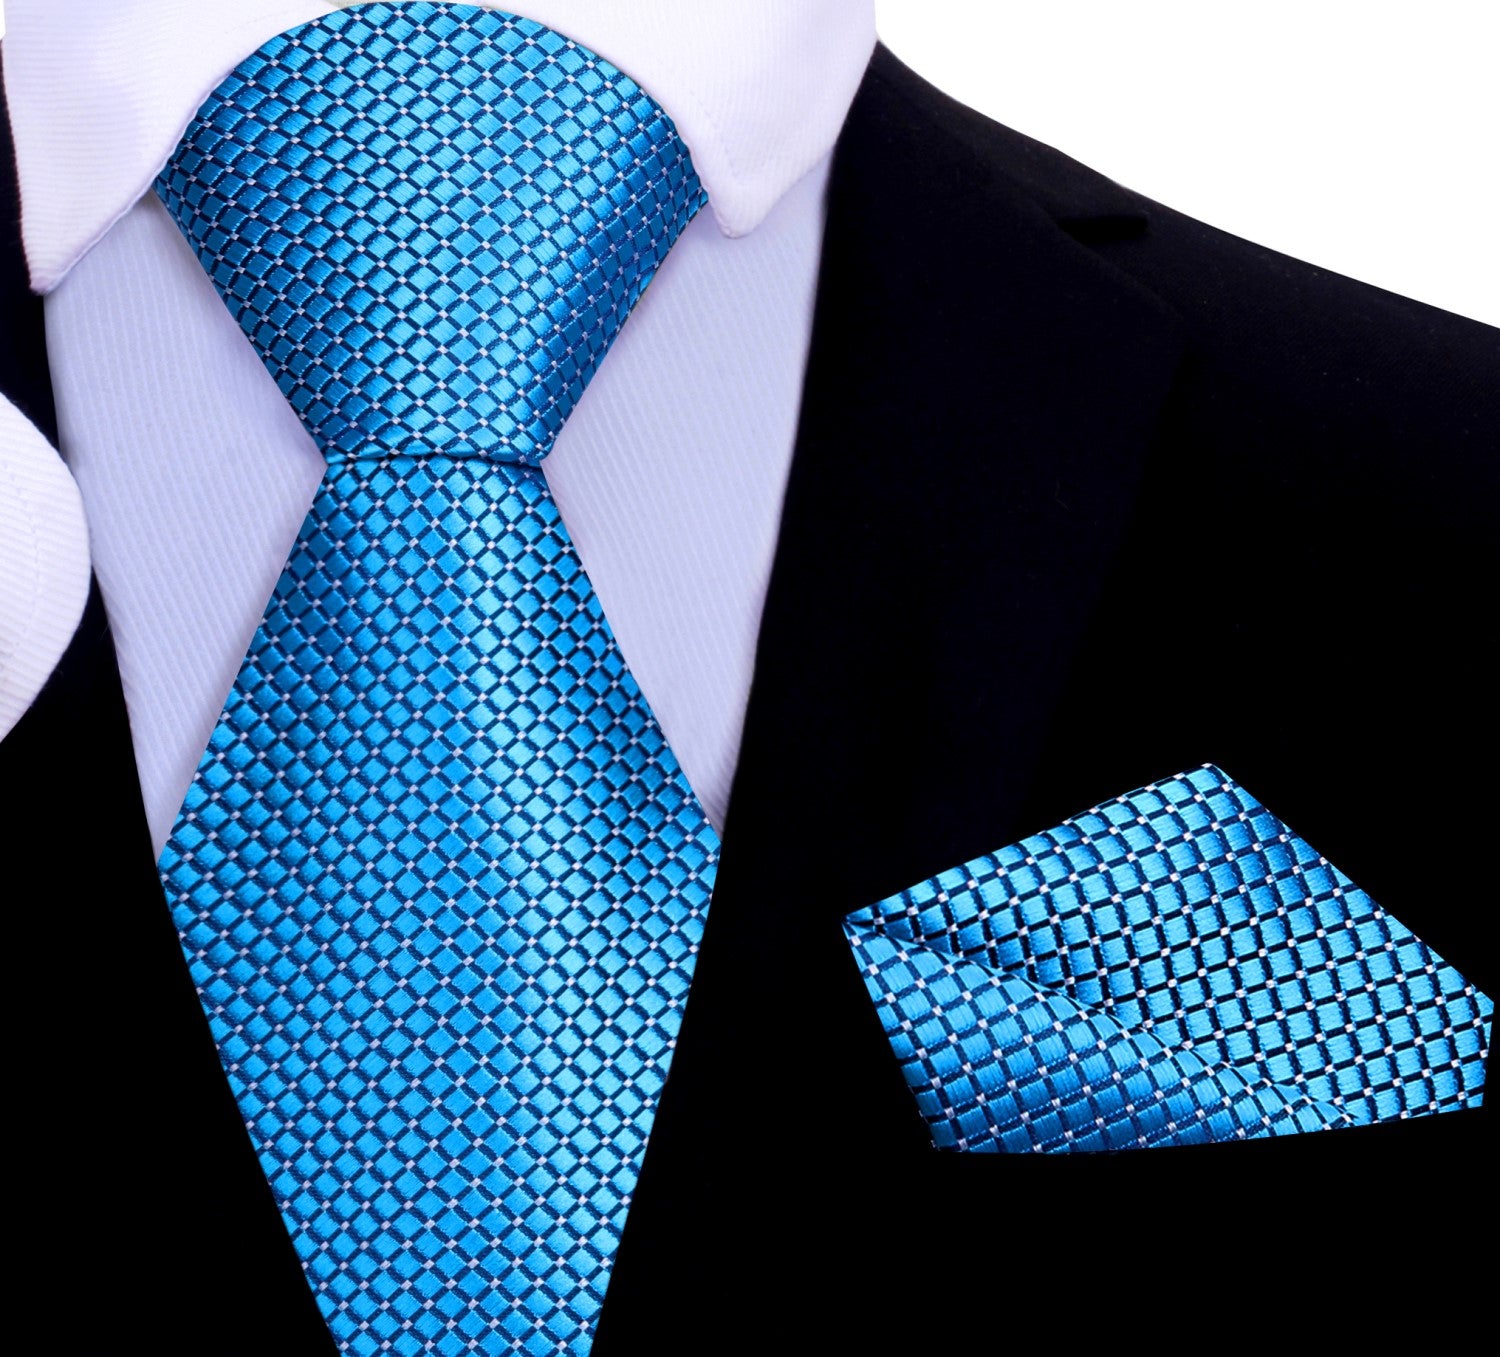 A Light Blue Small Geometric Diamond With Small Dots Pattern Silk Necktie With Square